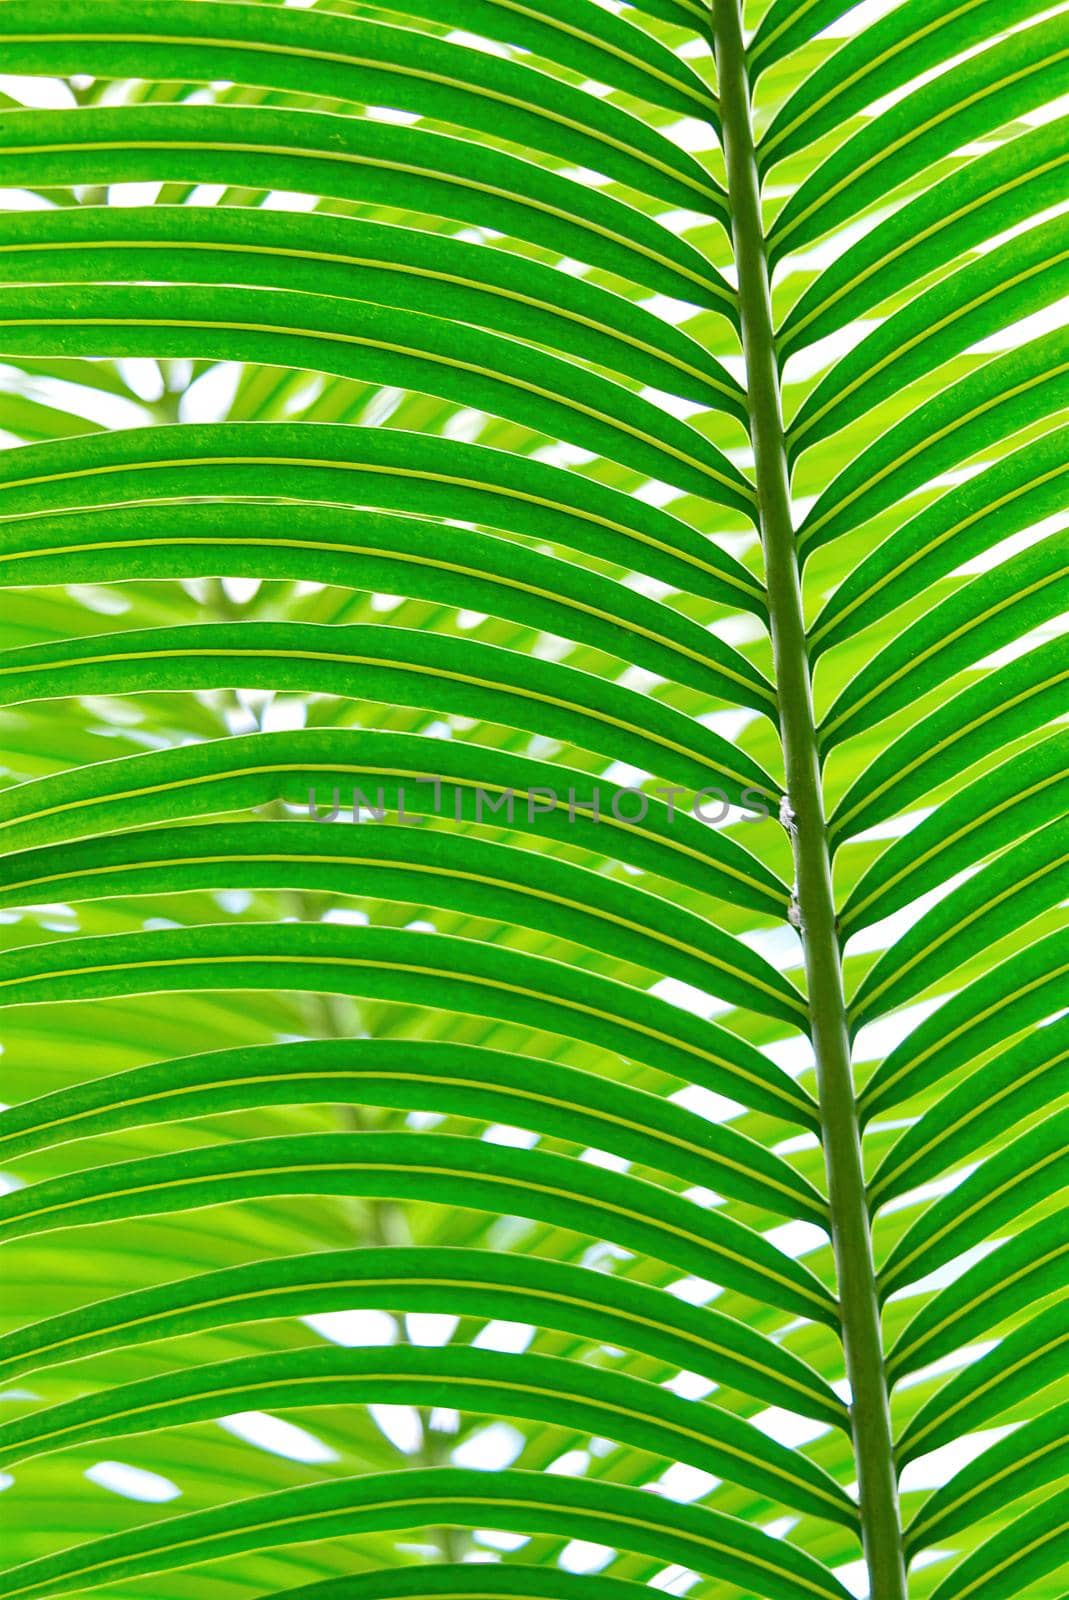 Abstract tropical green texture background, Striped of palm leaf, Vintage tone